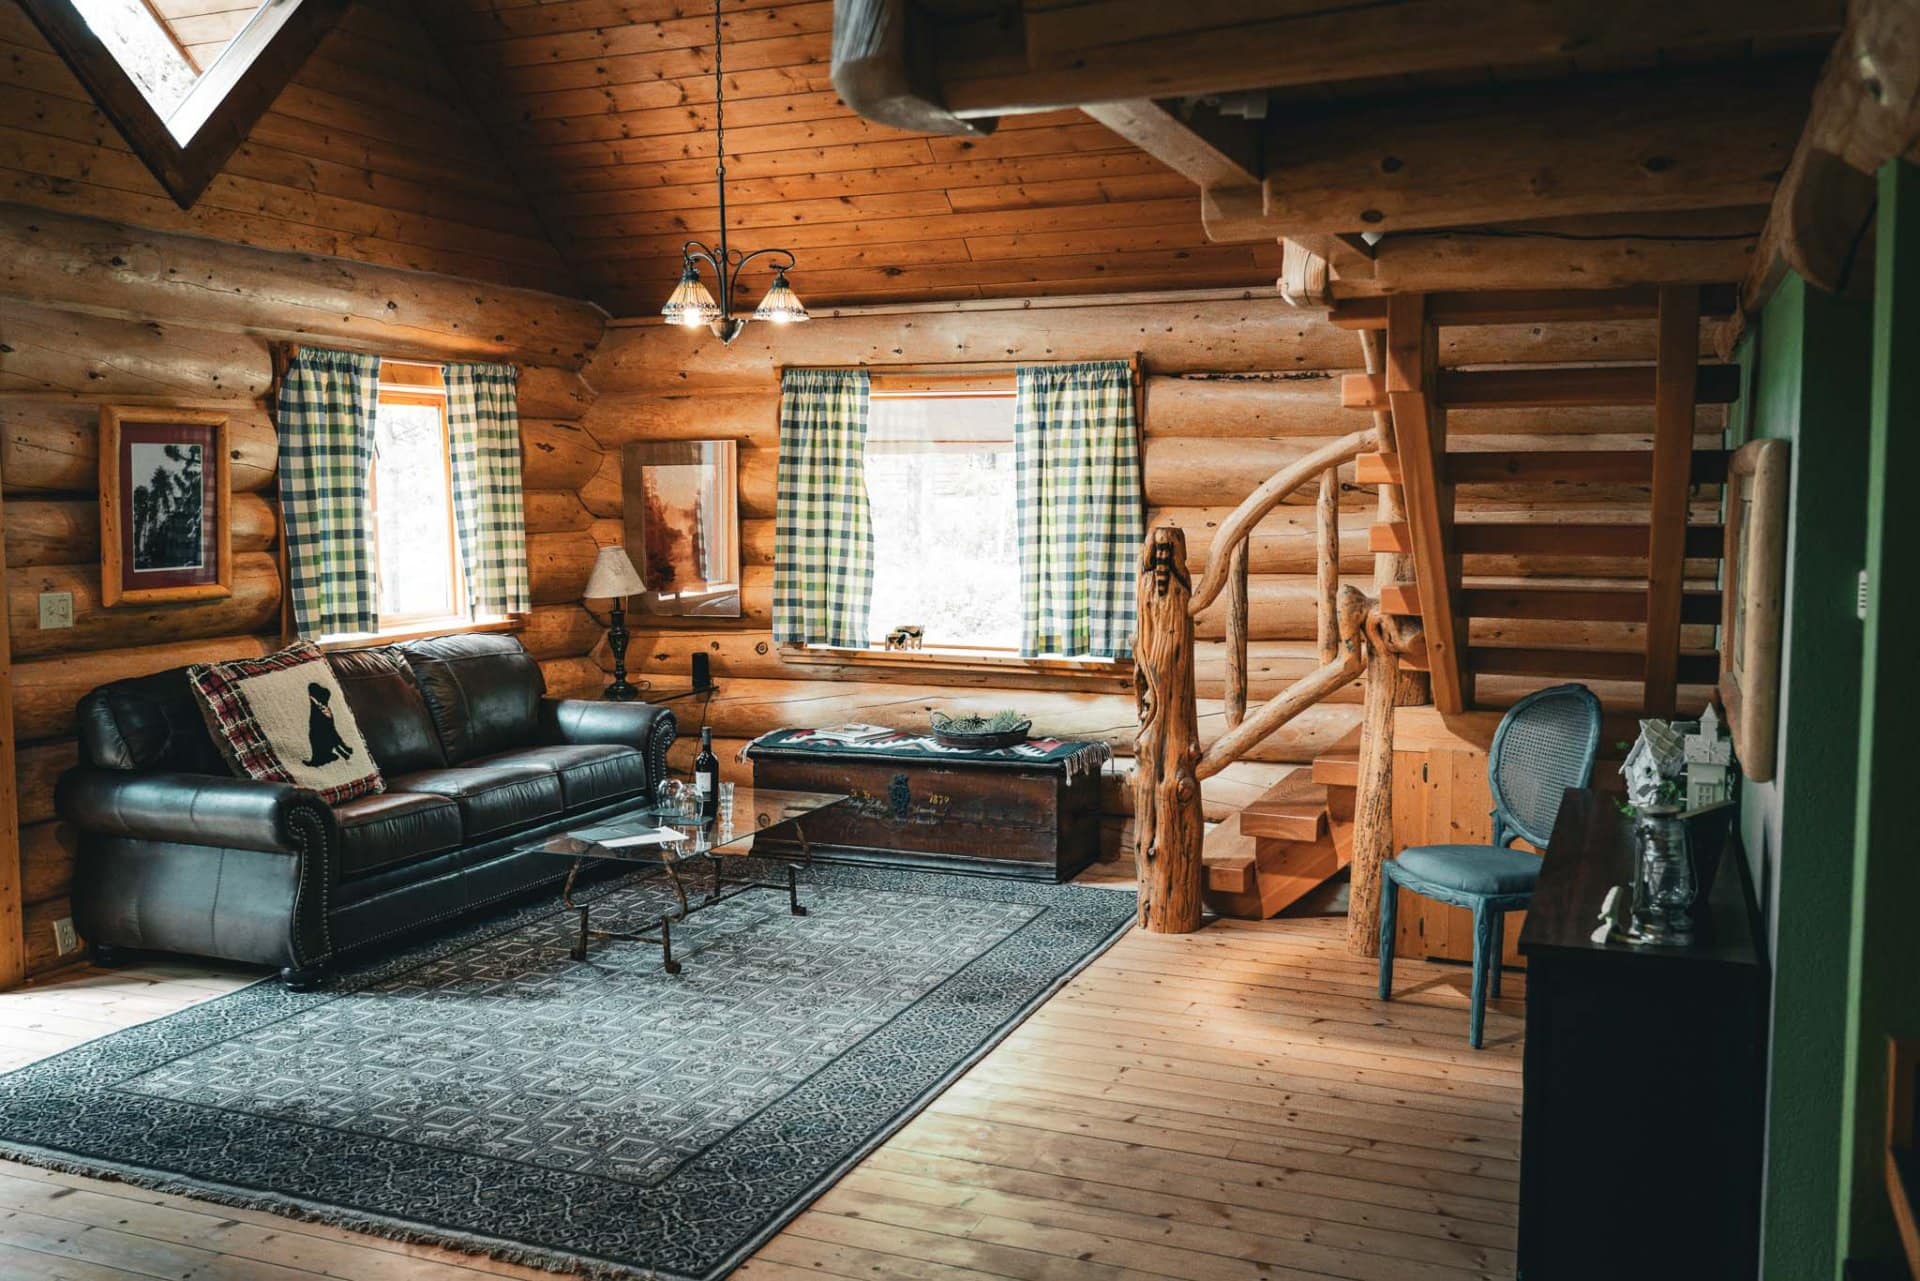 bryans interior bc canada eye of the grizzly luxury retreat